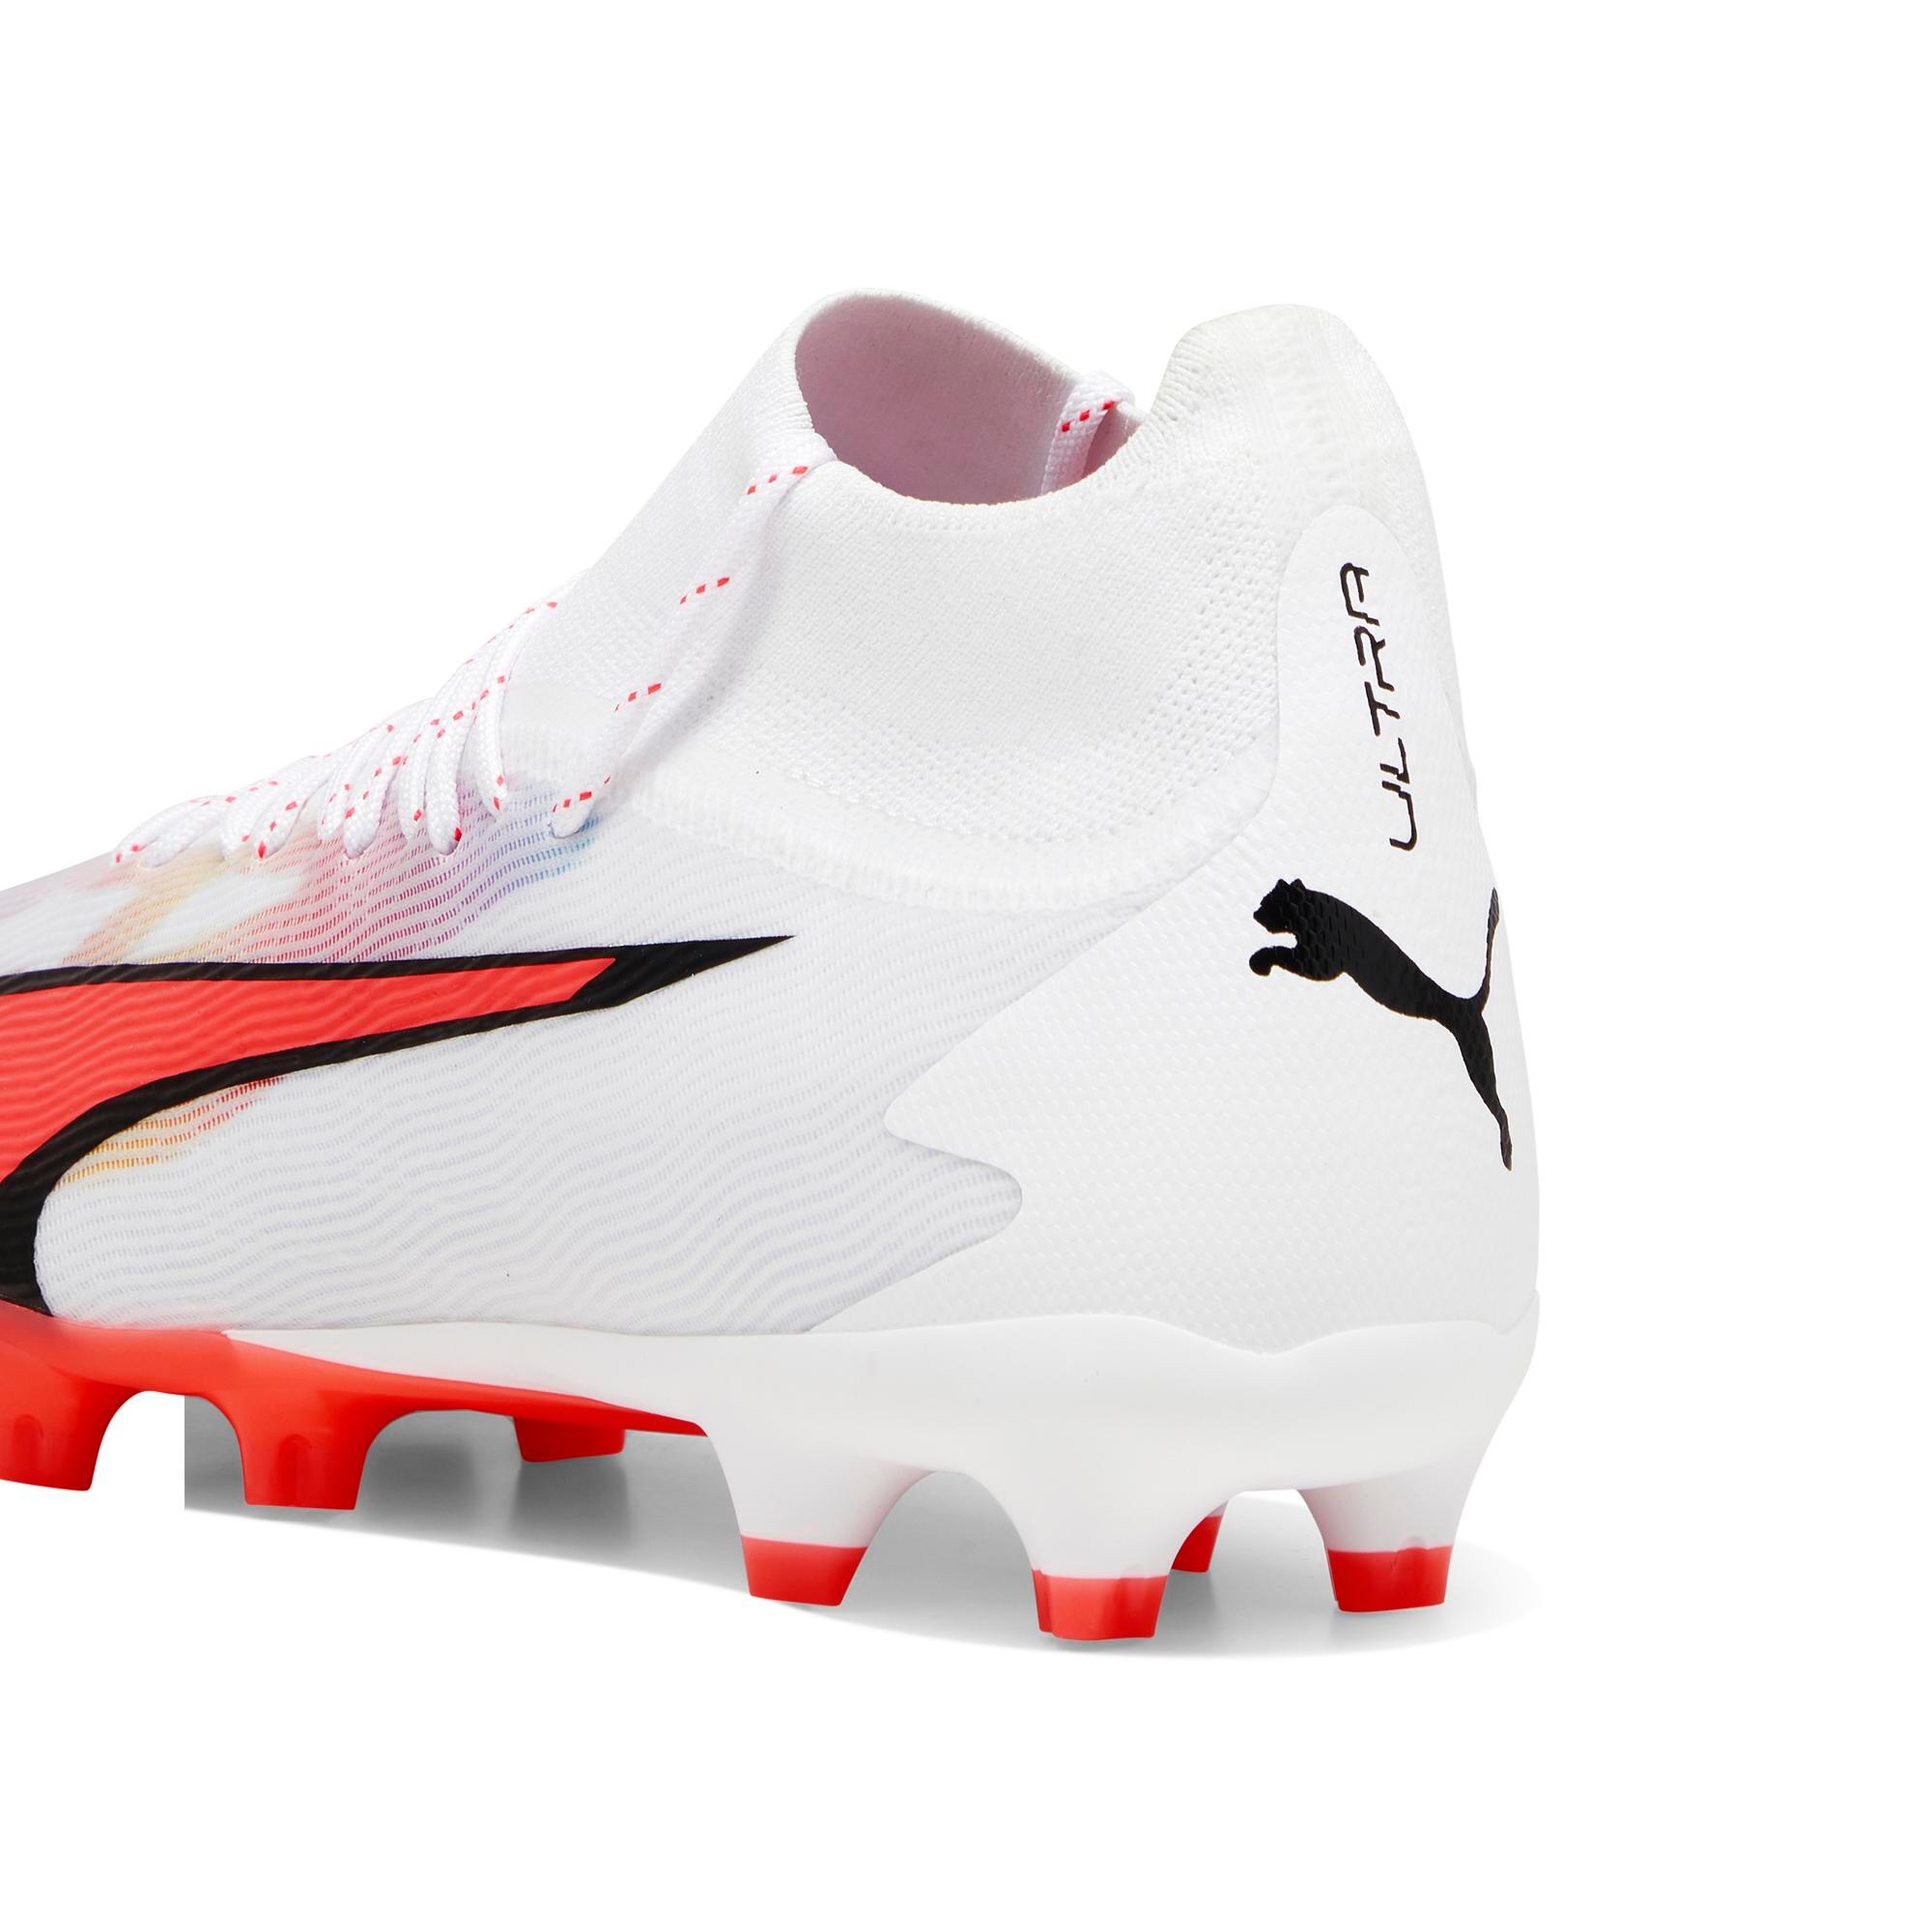 Adult FG/AG Future.2 Pro - White/Red 5/6